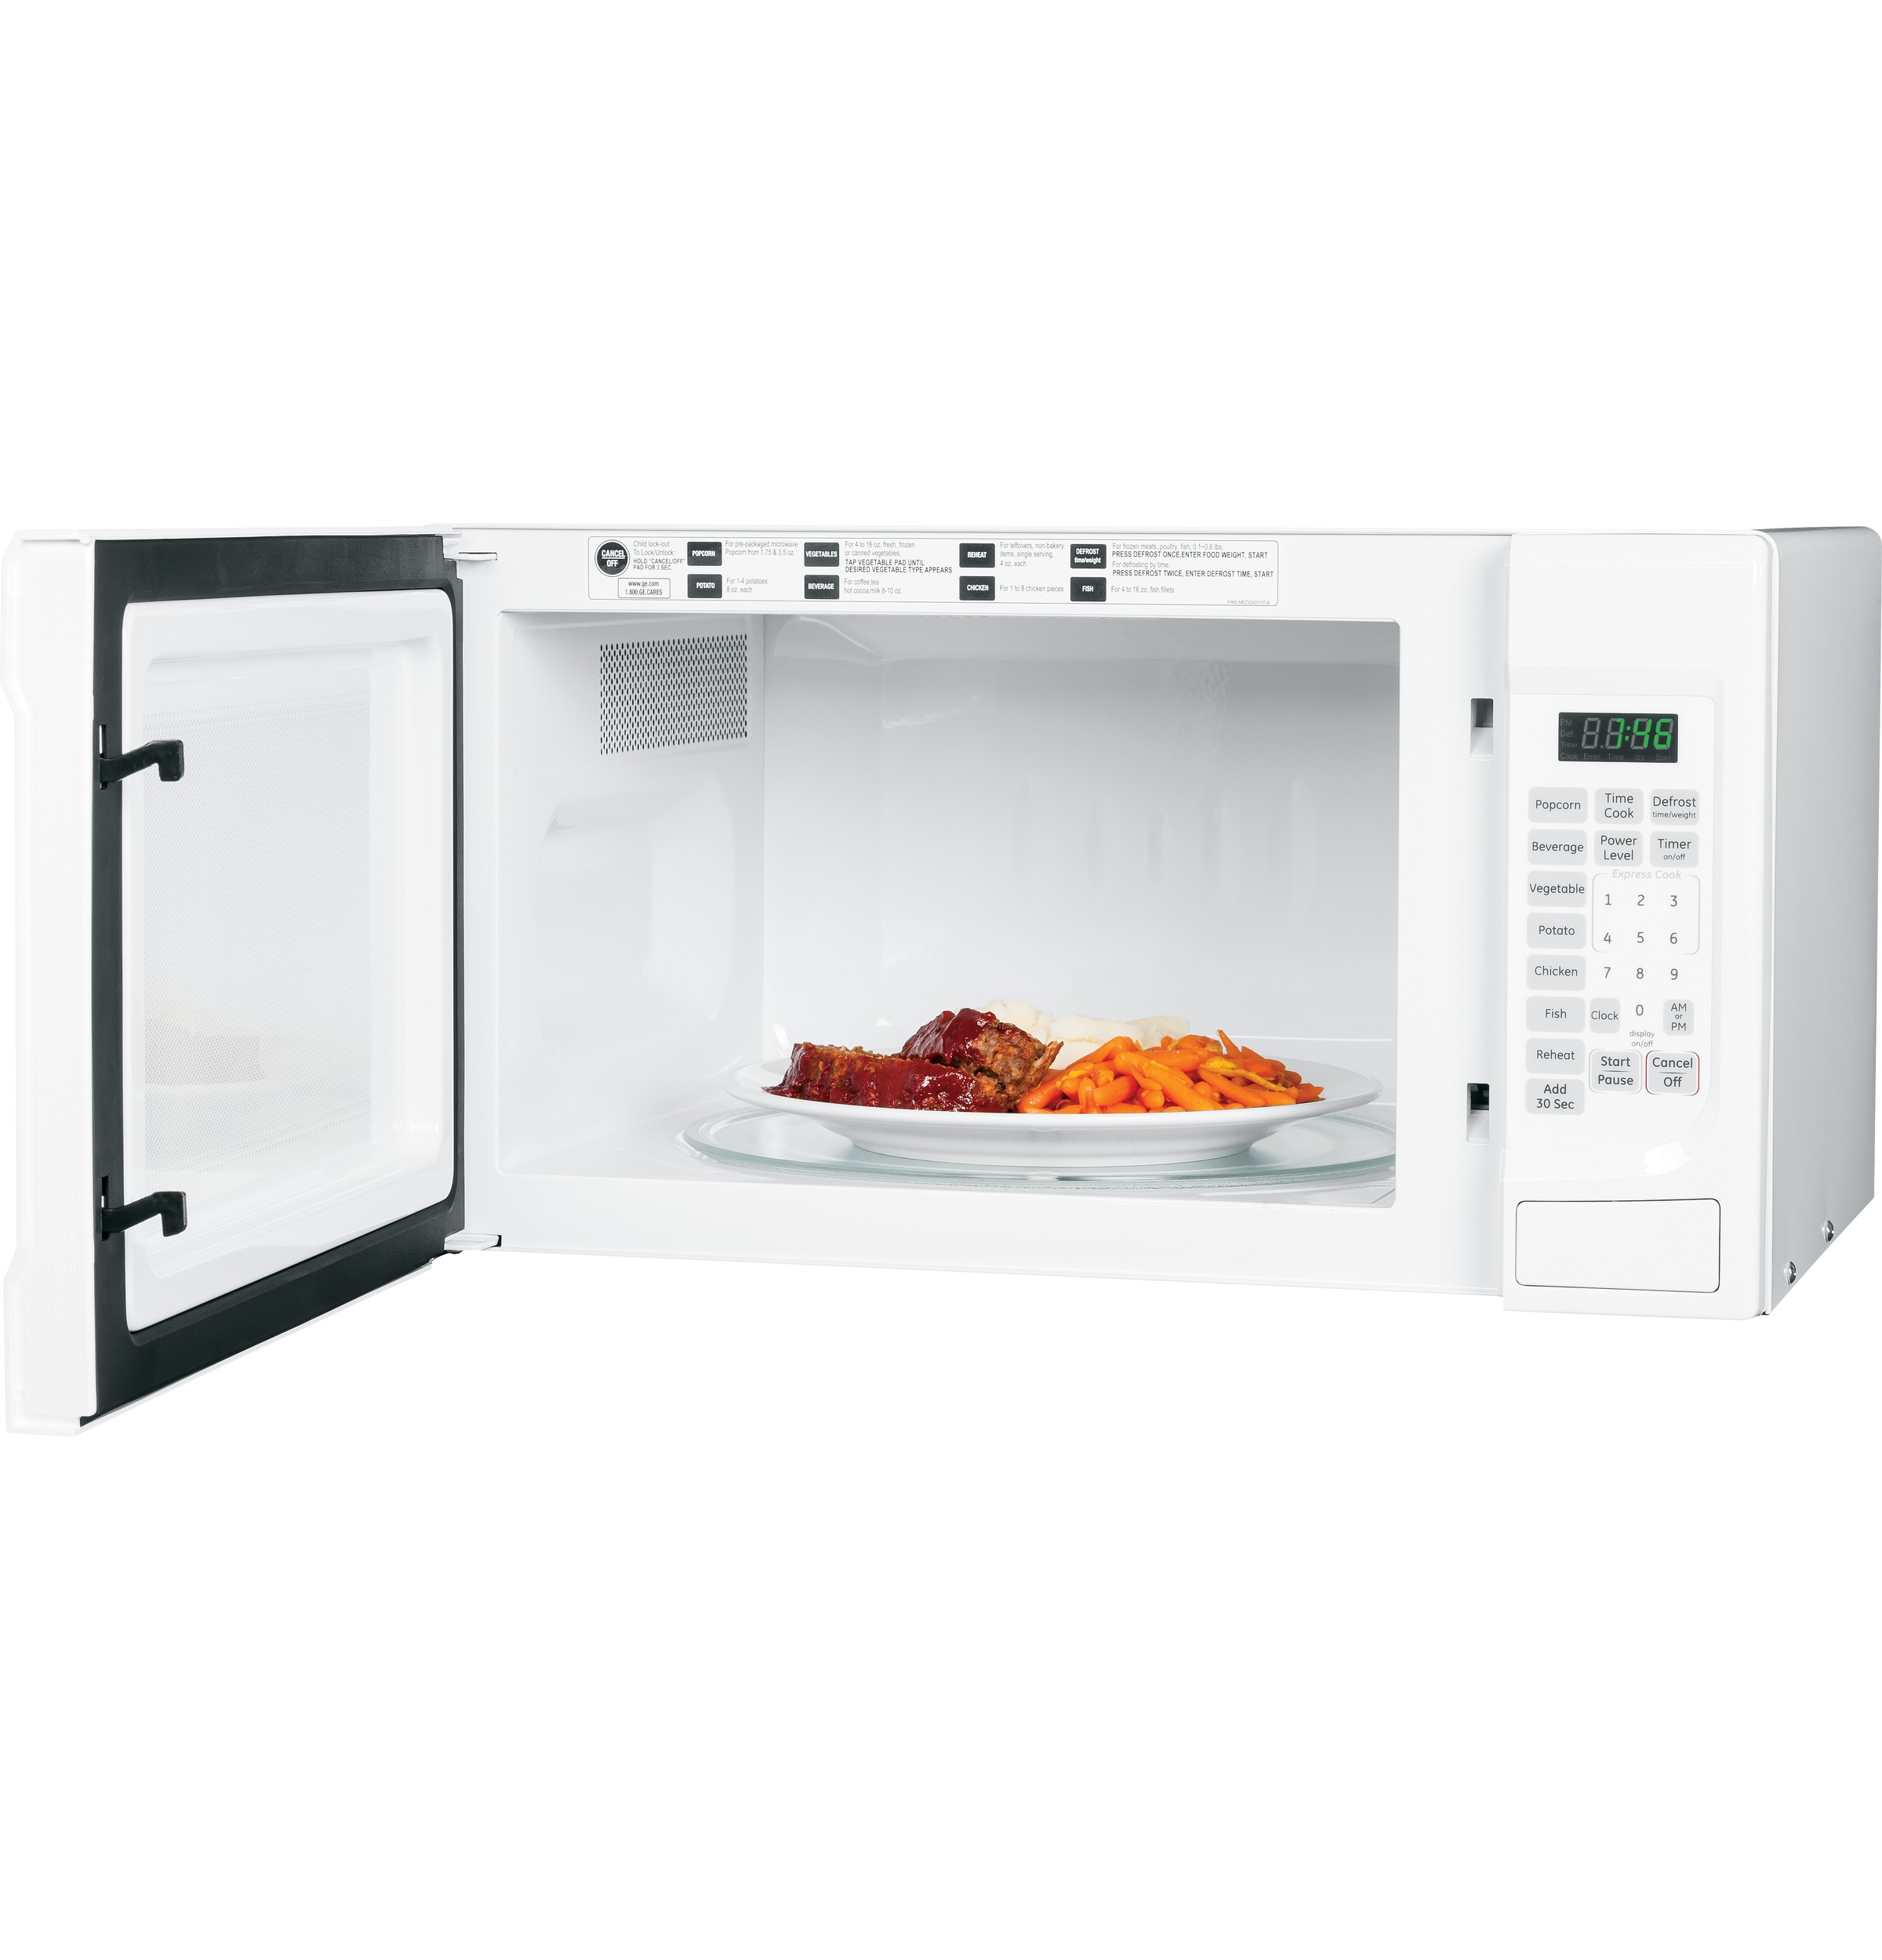 GE® 1.4 Cubic Foot Capacity Countertop Microwave Oven, White, JES1460DSWW - image 5 of 11